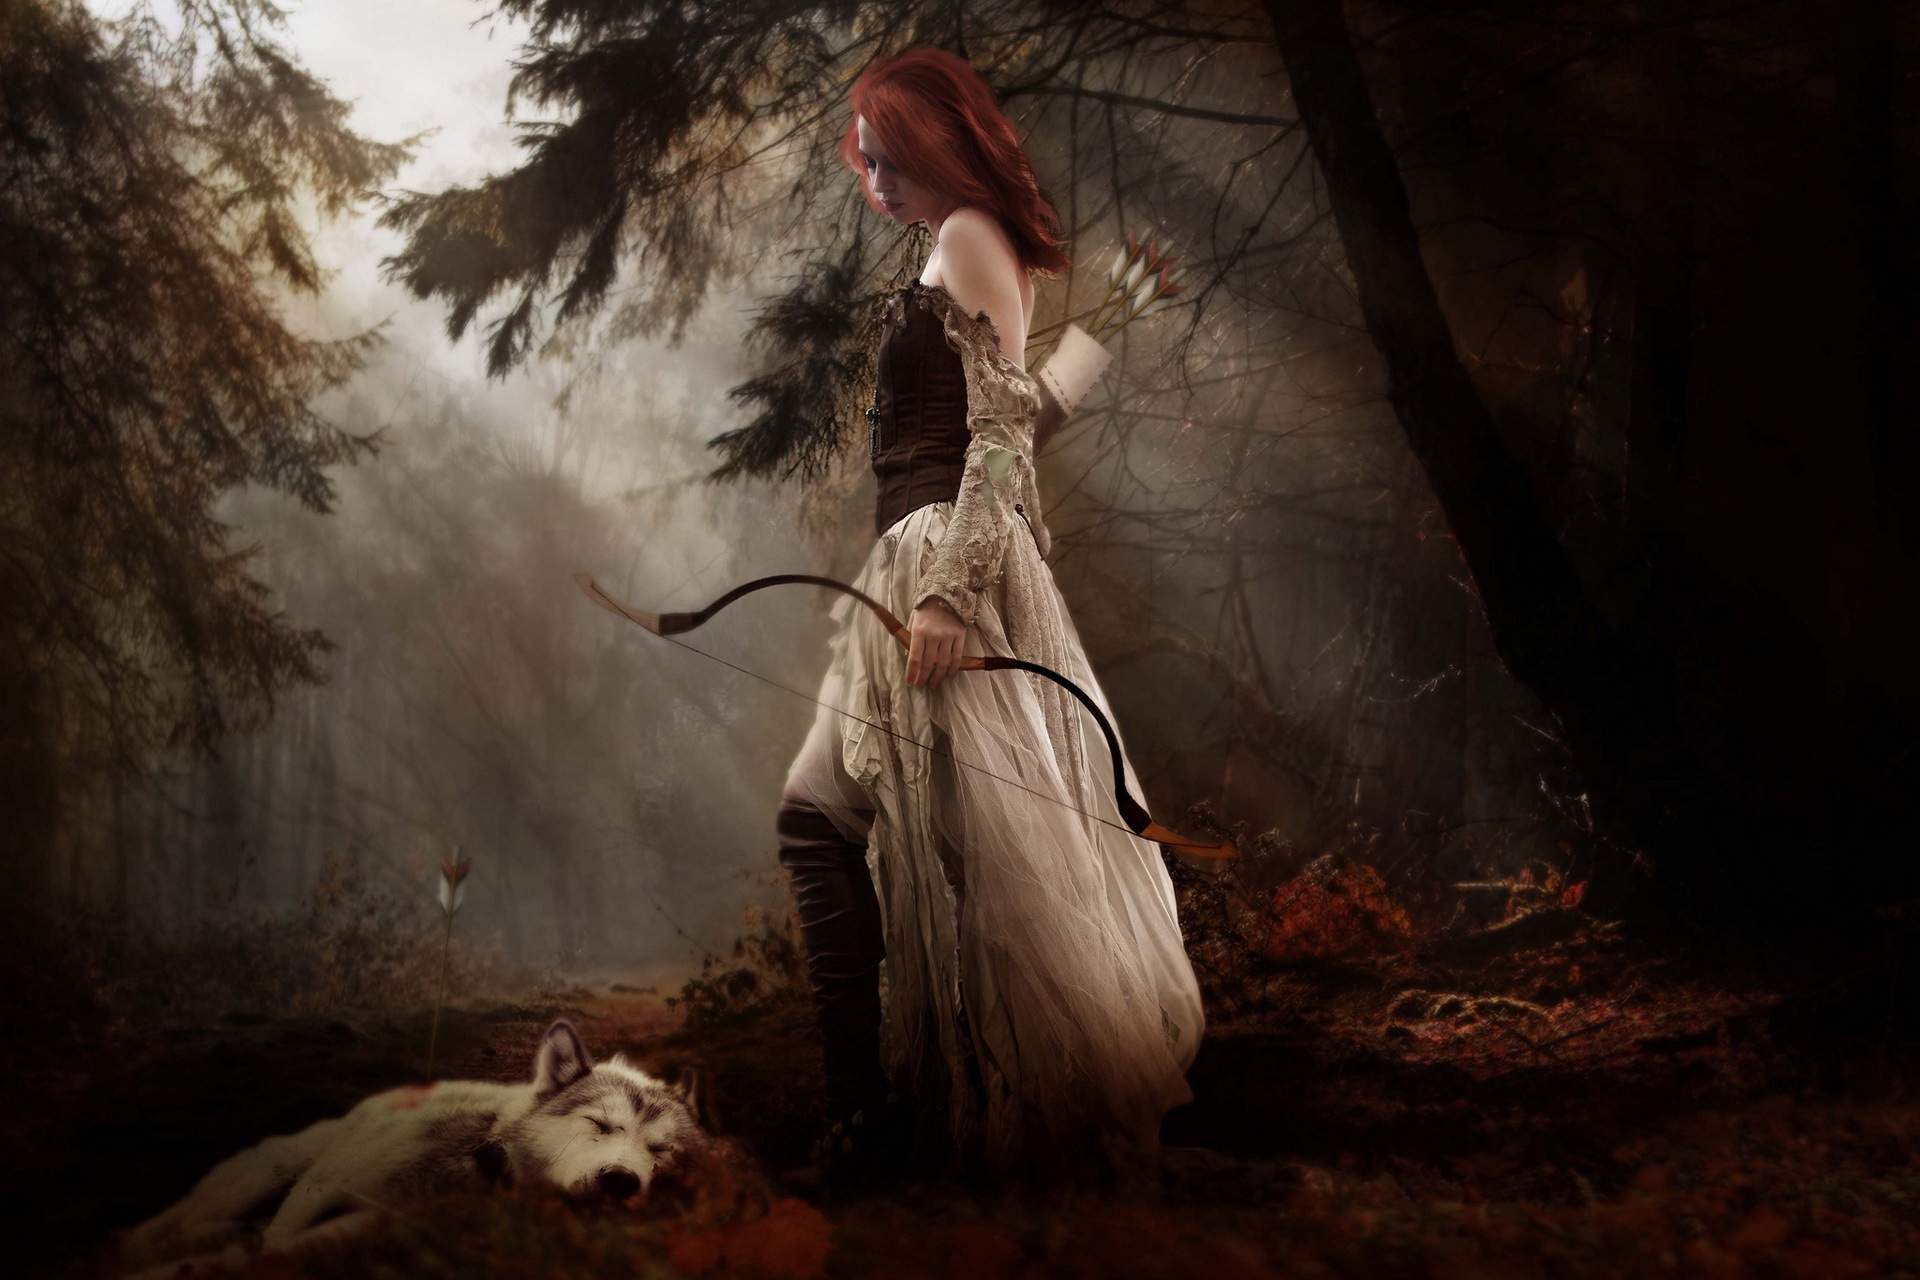 fantasy, Cg, Digital, Art, Manipulation, Mood, Women, Females, Girls, Redheads, Babes, Gothic, Weapons, Bow, Arcger, Gown, Nature, Trees, Forest, Woods, Fog, Animals, Wolf, Wolves Wallpaper